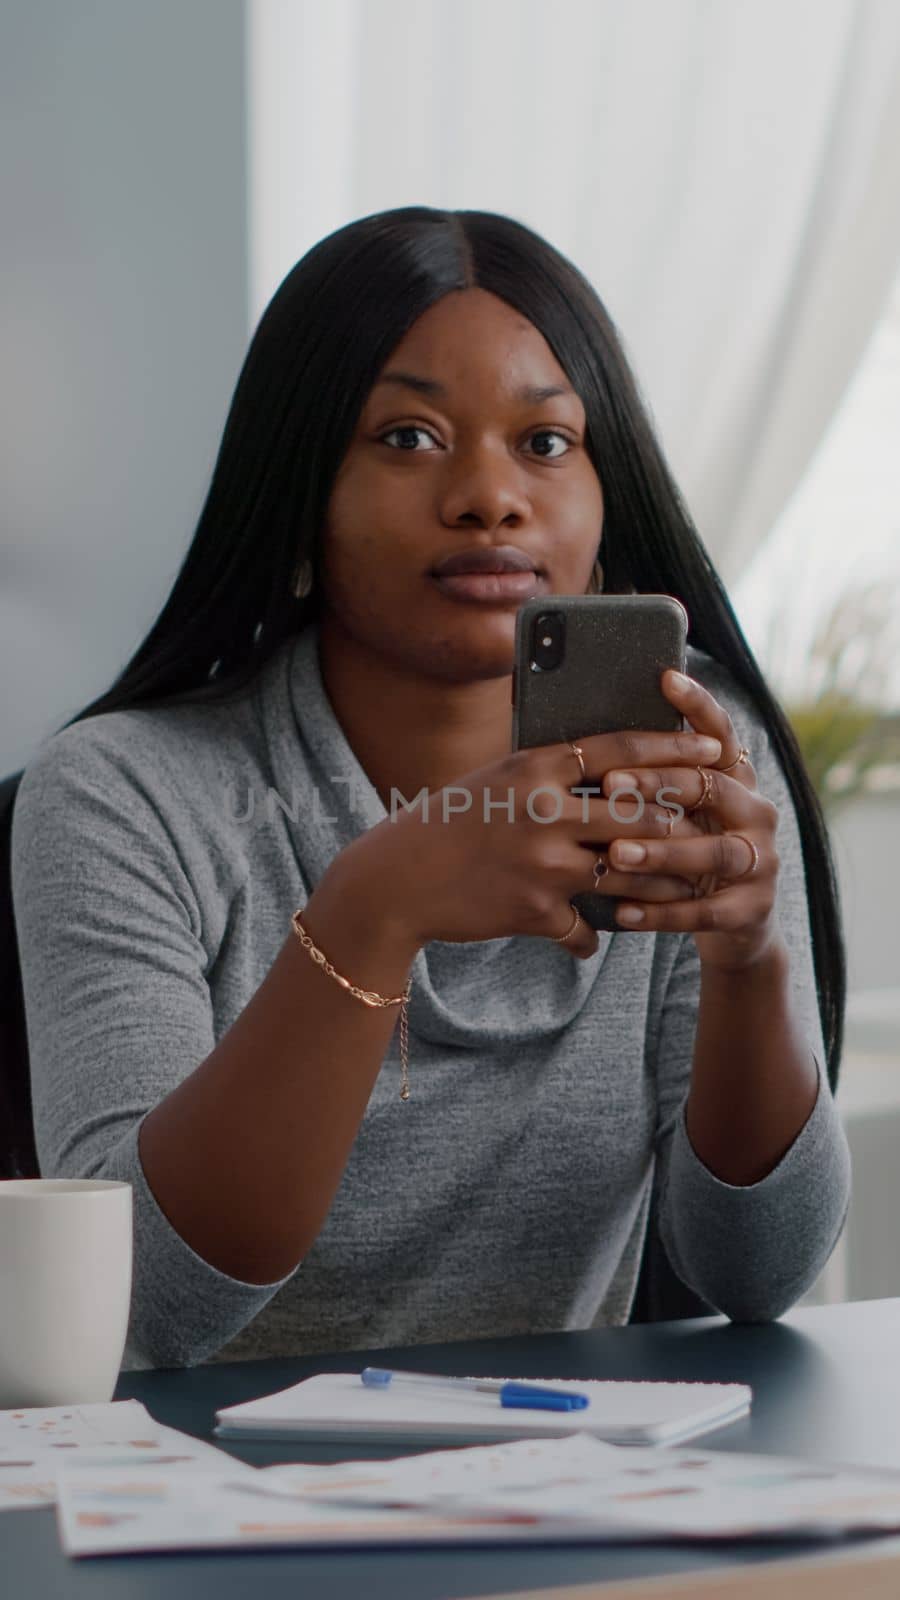 Black student holding phone in hands chatting with people browsing communication information sitting at desk in living room. Teenager looking on social media sharing lifestyle advice to group friends